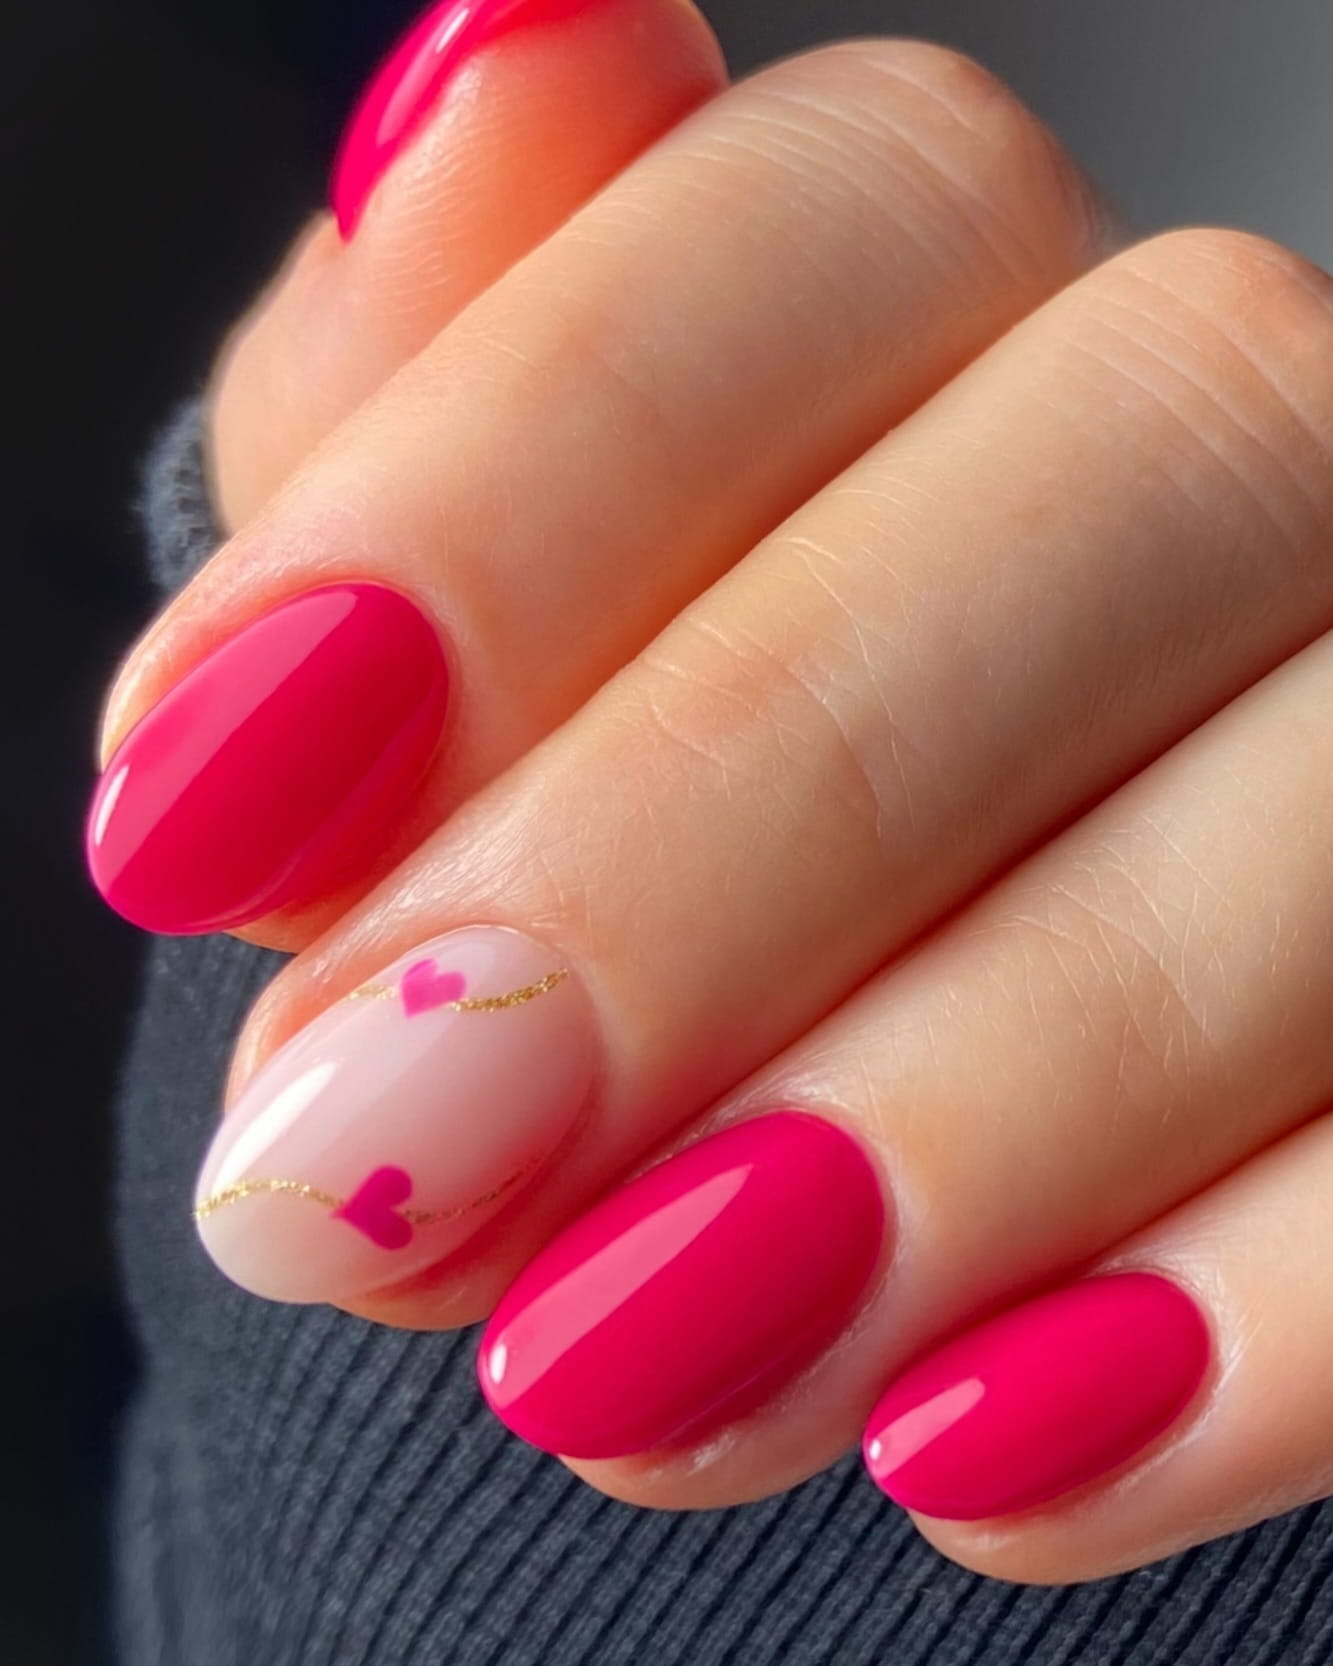 100 Of The Best Spring Inspired Nail Designs images 56